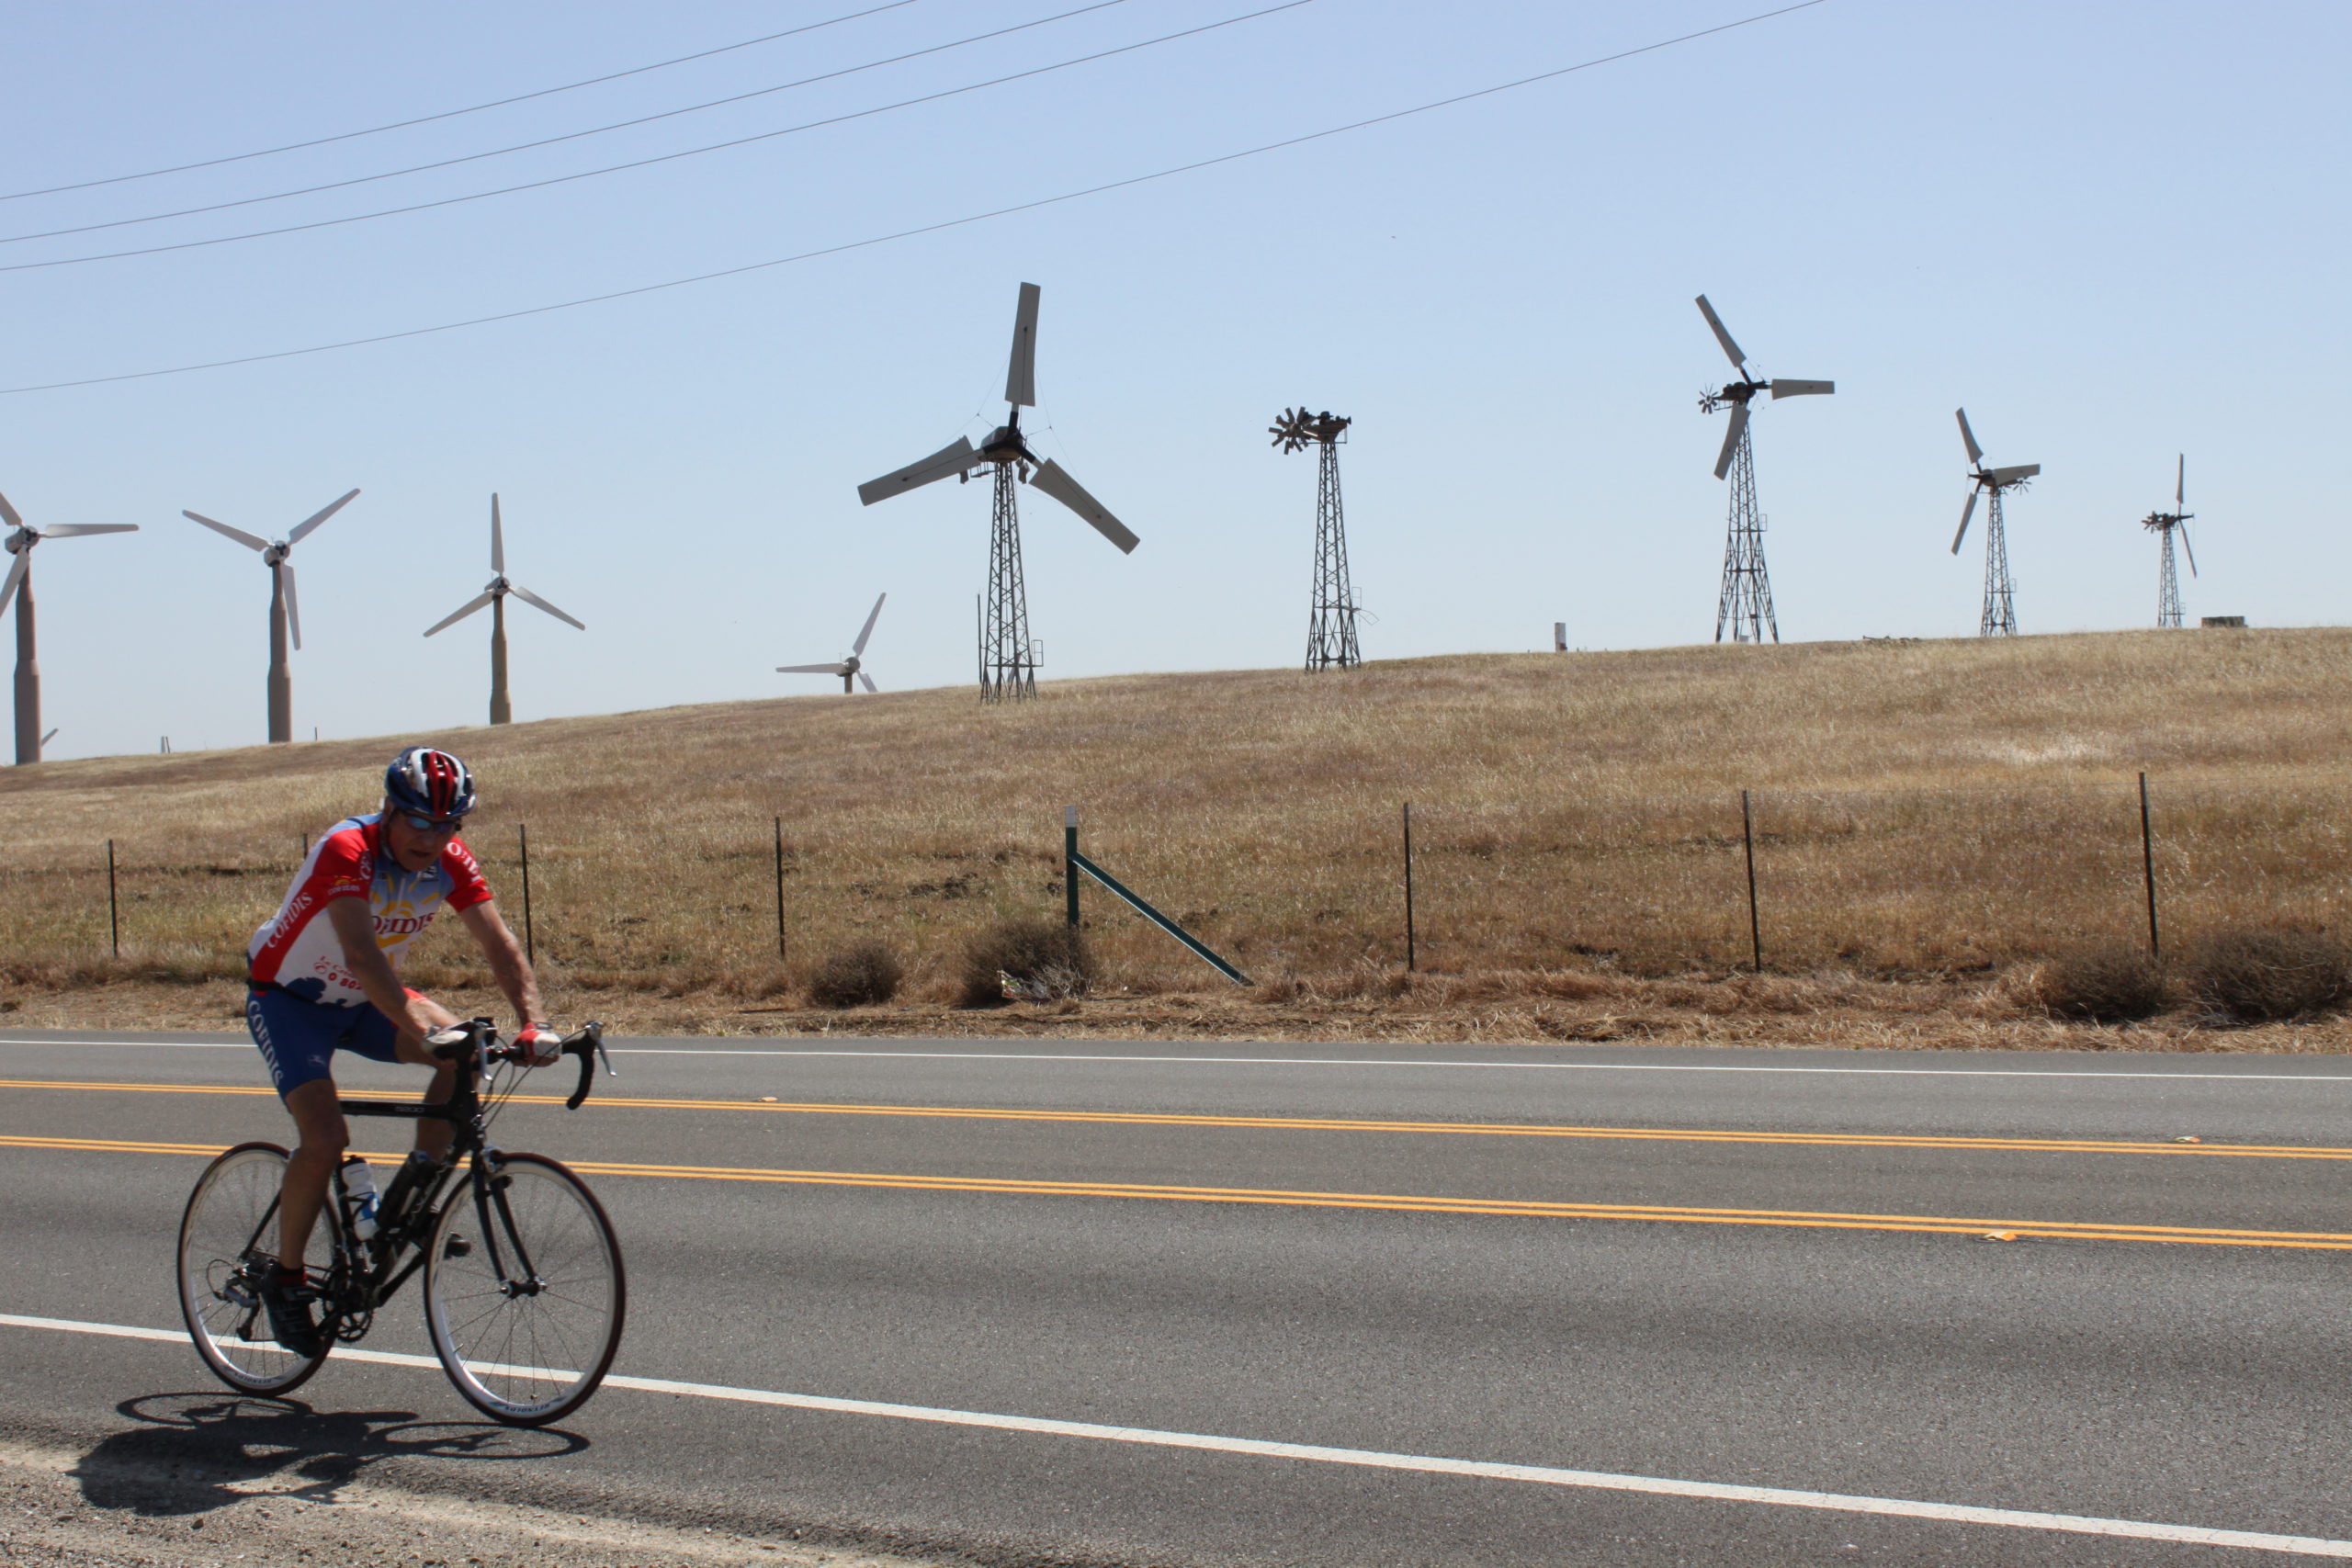 Multiple styles of wind turbines in various states of repair on Altamont Pass. Oh, and a biker. (Photo: Phil Warburg)